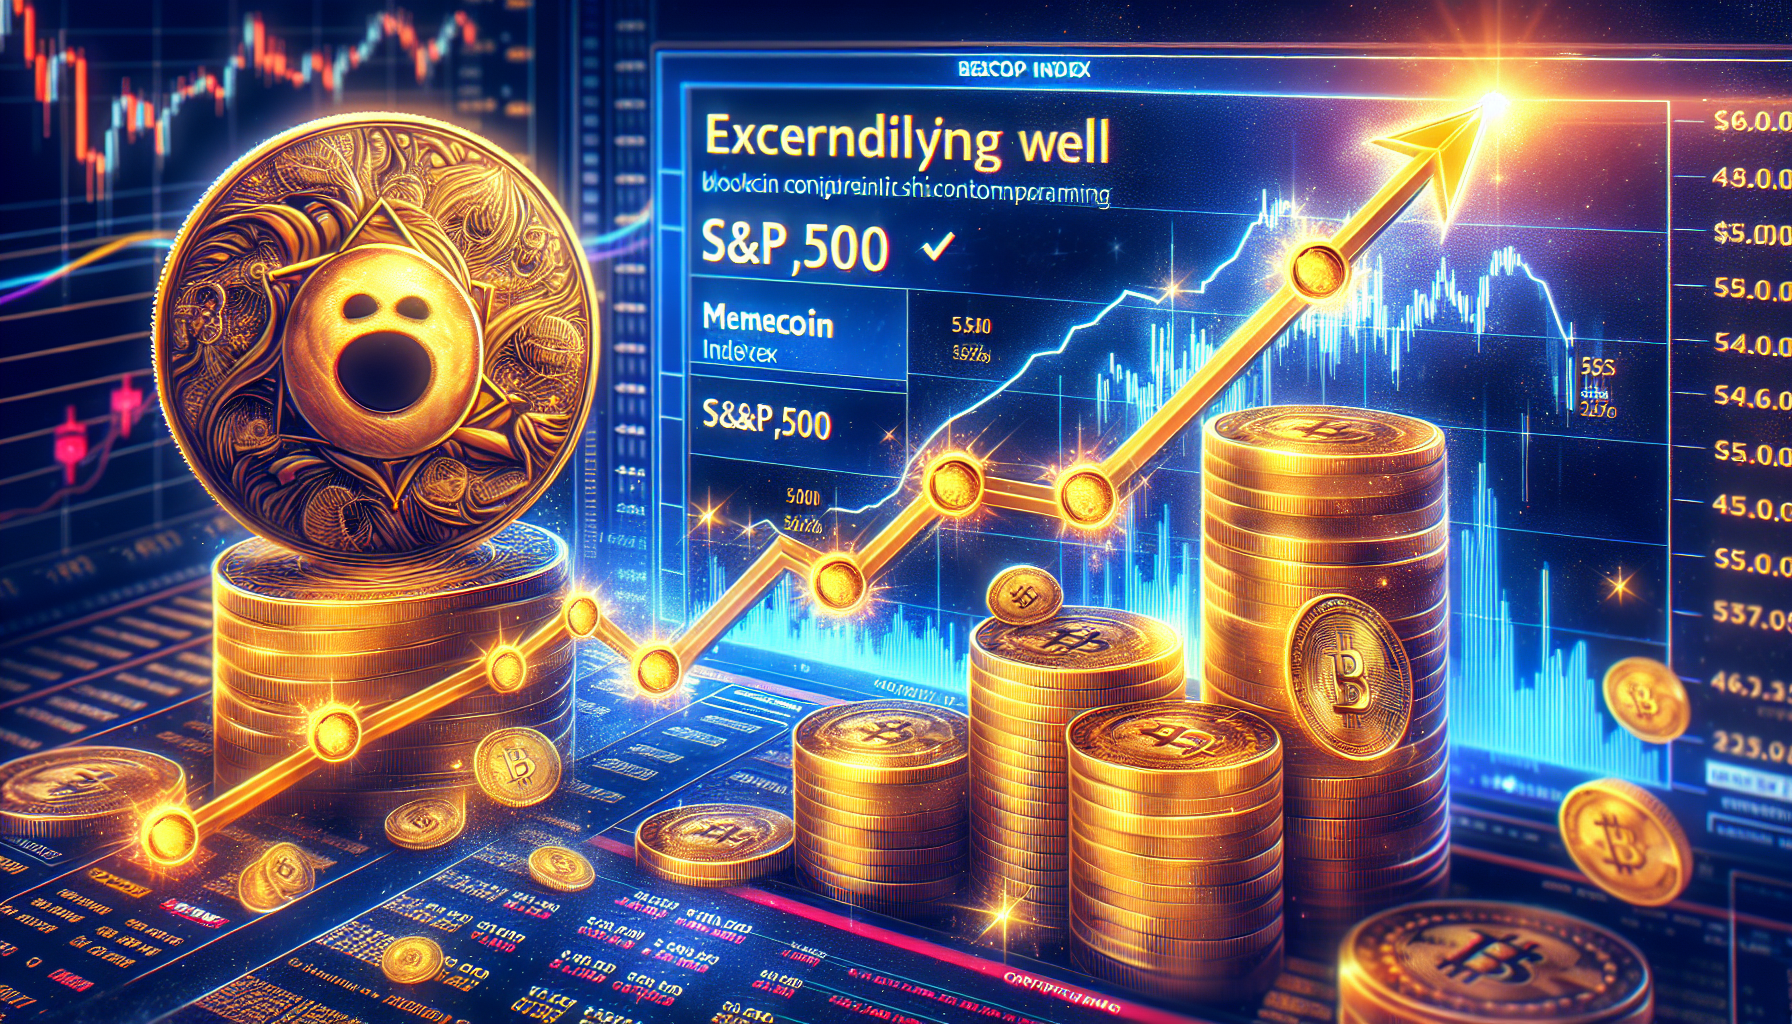 VanEck’s Memecoin Index Outperforms S&P500 in 2021